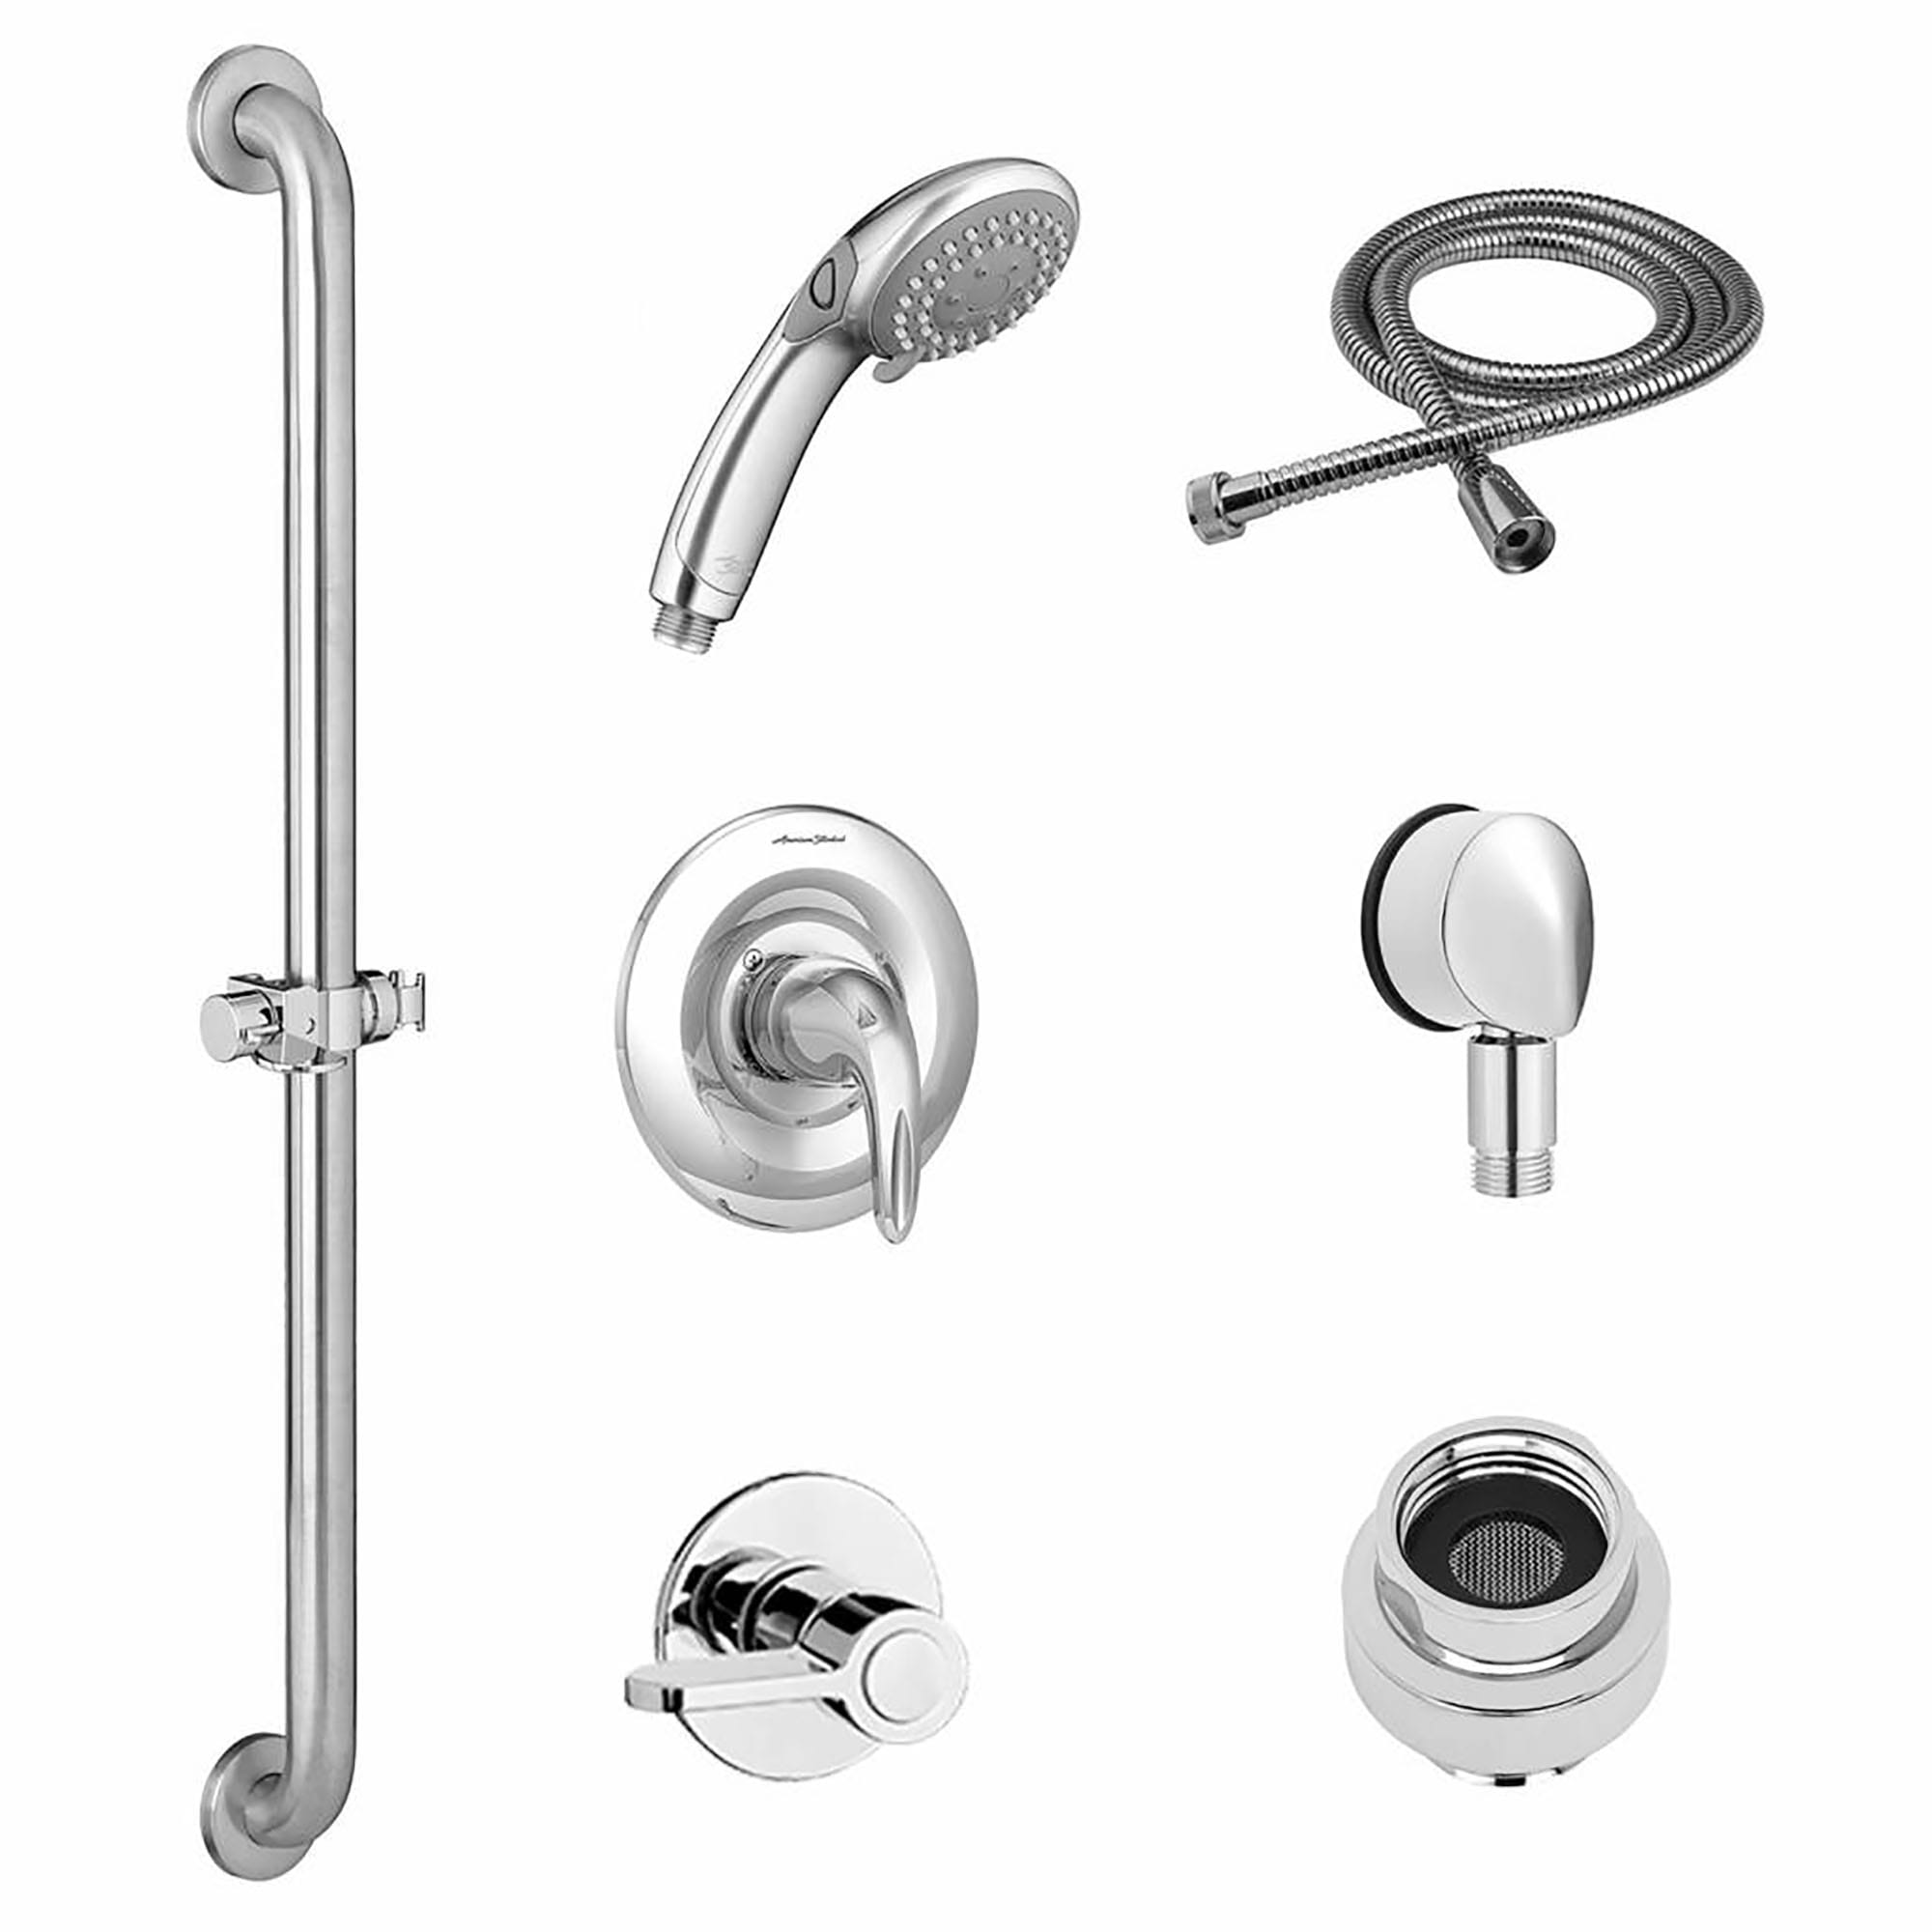 Commercial Shower System Trim Kit 2.5 gpm/9.5 Lpm with 36-Inch Slide-Grab Bar, Hand Shower and Showerhead